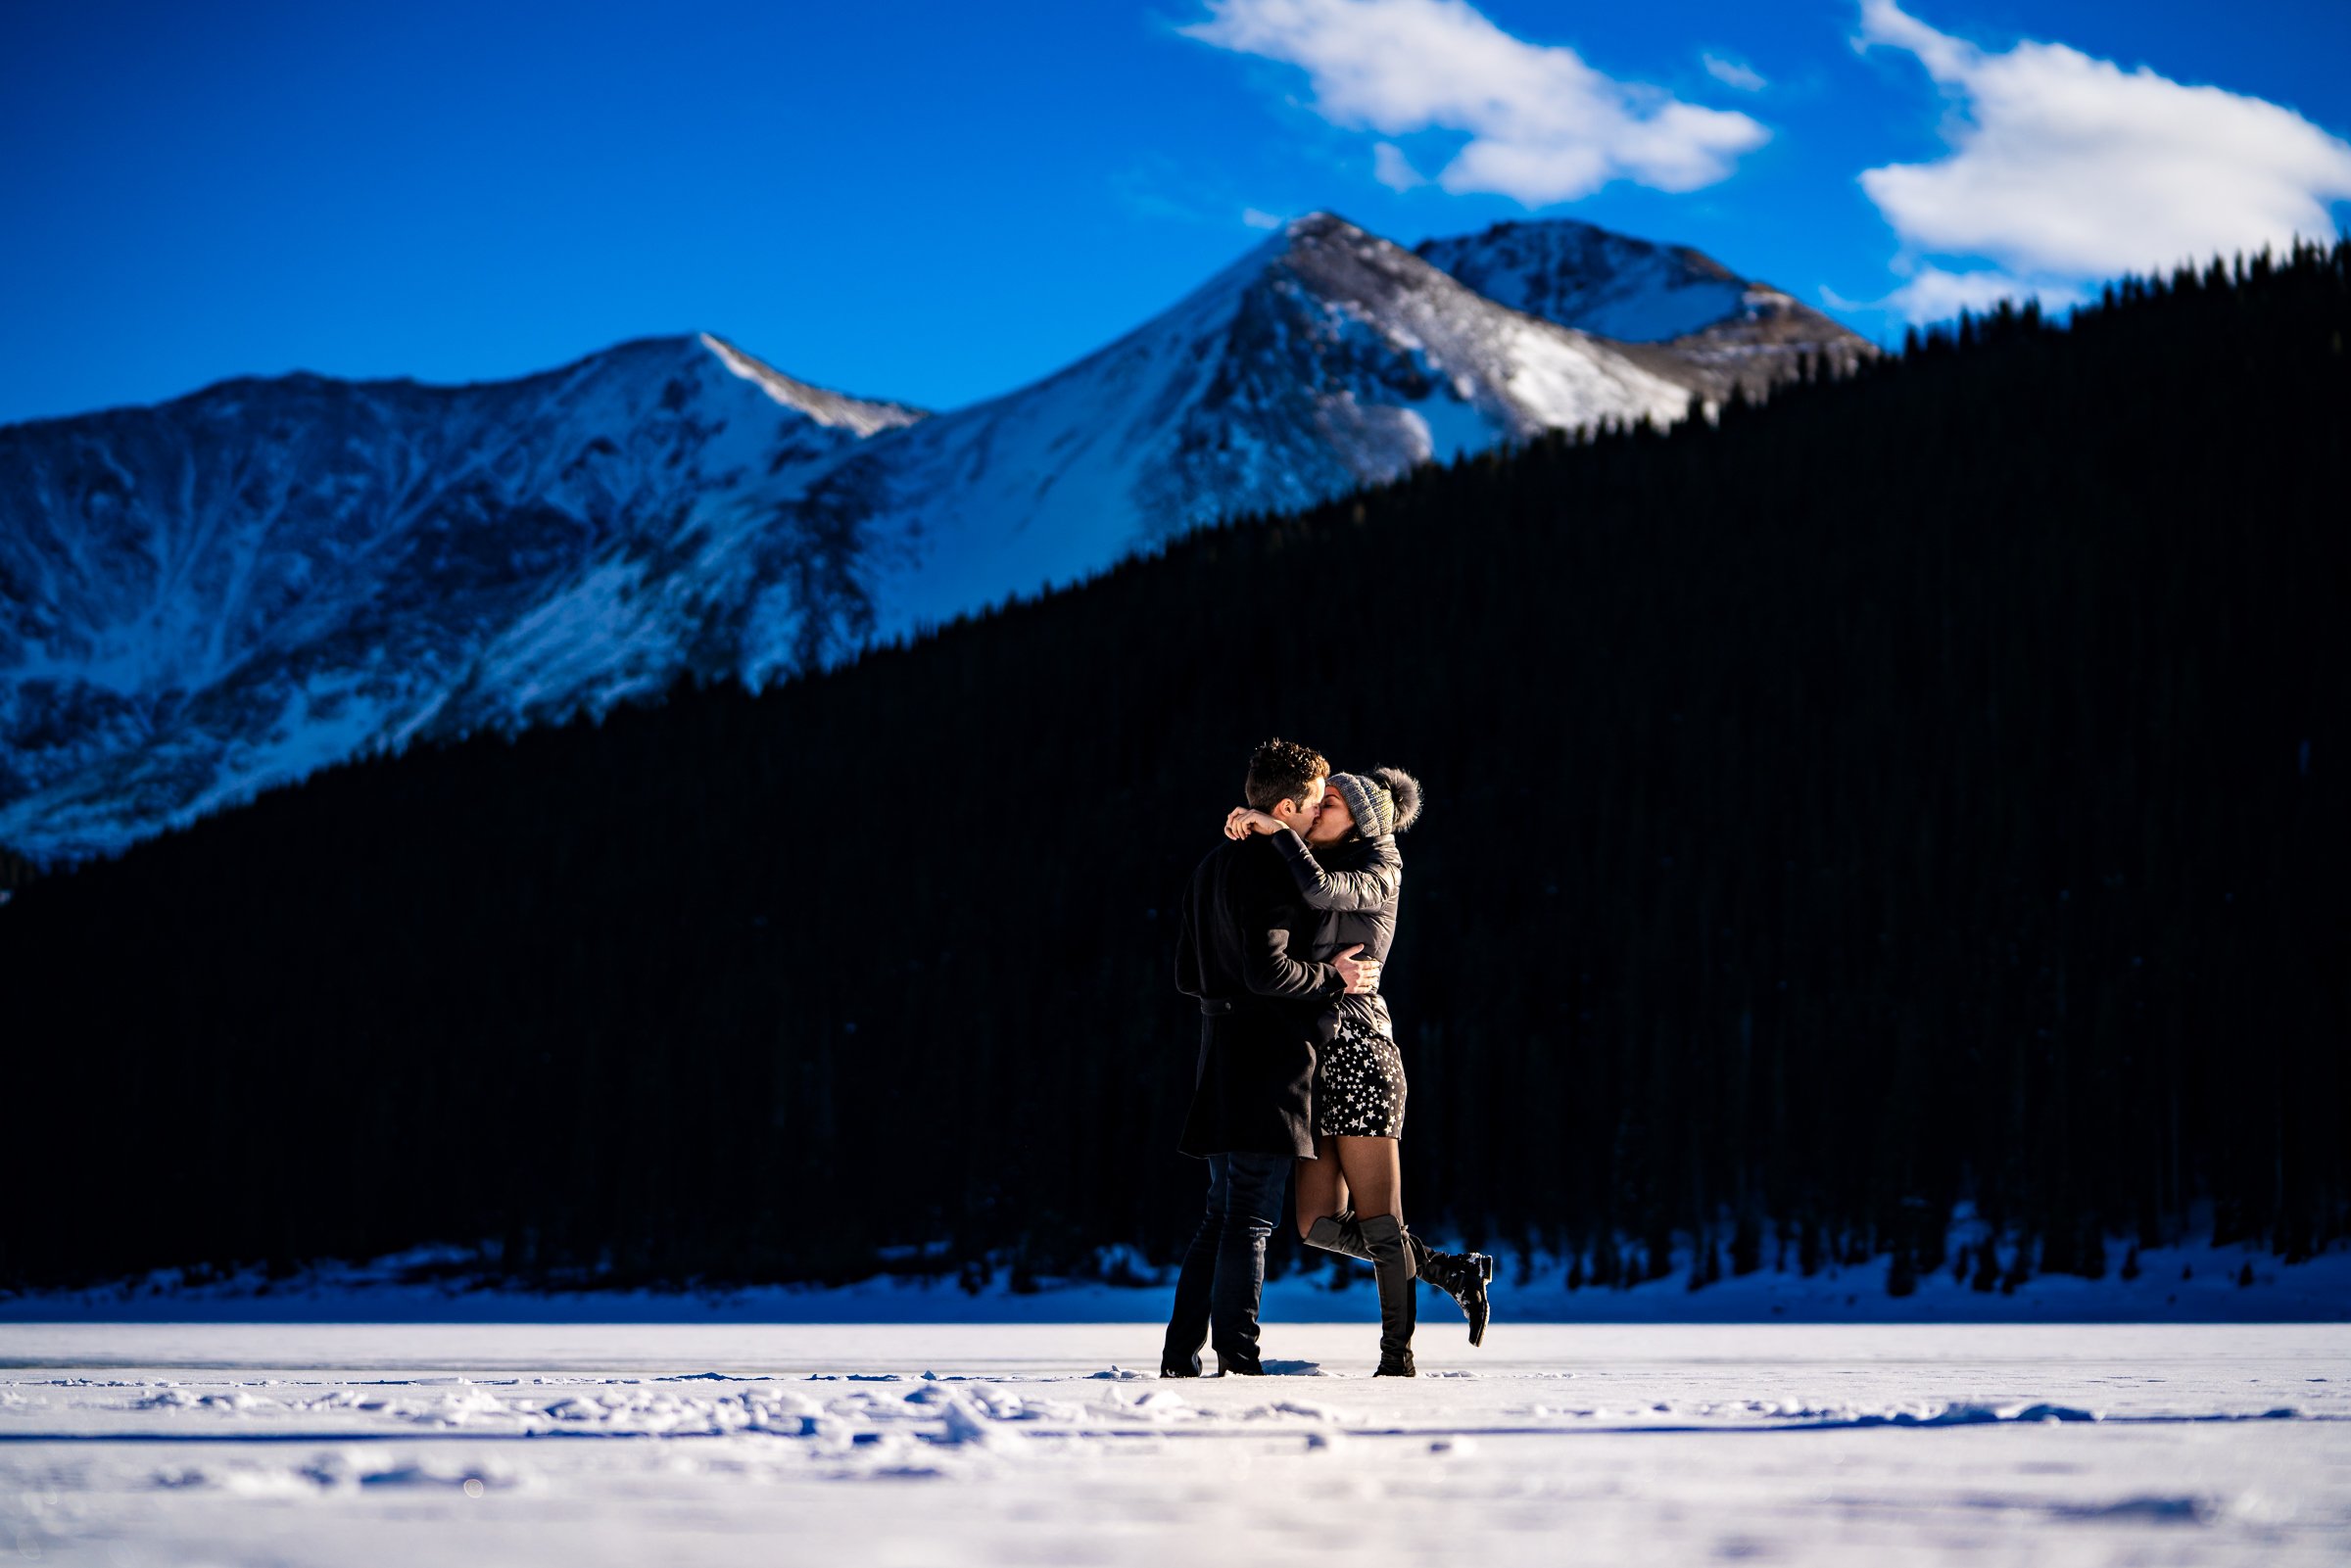 Engaged couple kisses while standing on a frozen lake with snowcapped mountains in the background, Engagement Session, Engagement Photos, Engagement Photos Inspiration, Engagement Photography, Engagement Photographer, Winter Engagement Photos, Proposal Photos, Proposal Photographer, Proposal Photography, Winter Proposal, Mountain Proposal, Proposal Inspiration, Summit County engagement session, Summit County engagement photos, Summit County engagement photography, Summit County engagement photographer, Summit County engagement inspiration, Colorado engagement session, Colorado engagement photos, Colorado engagement photography, Colorado engagement photographer, Colorado engagement inspiration, Clinton Gulch Engagement